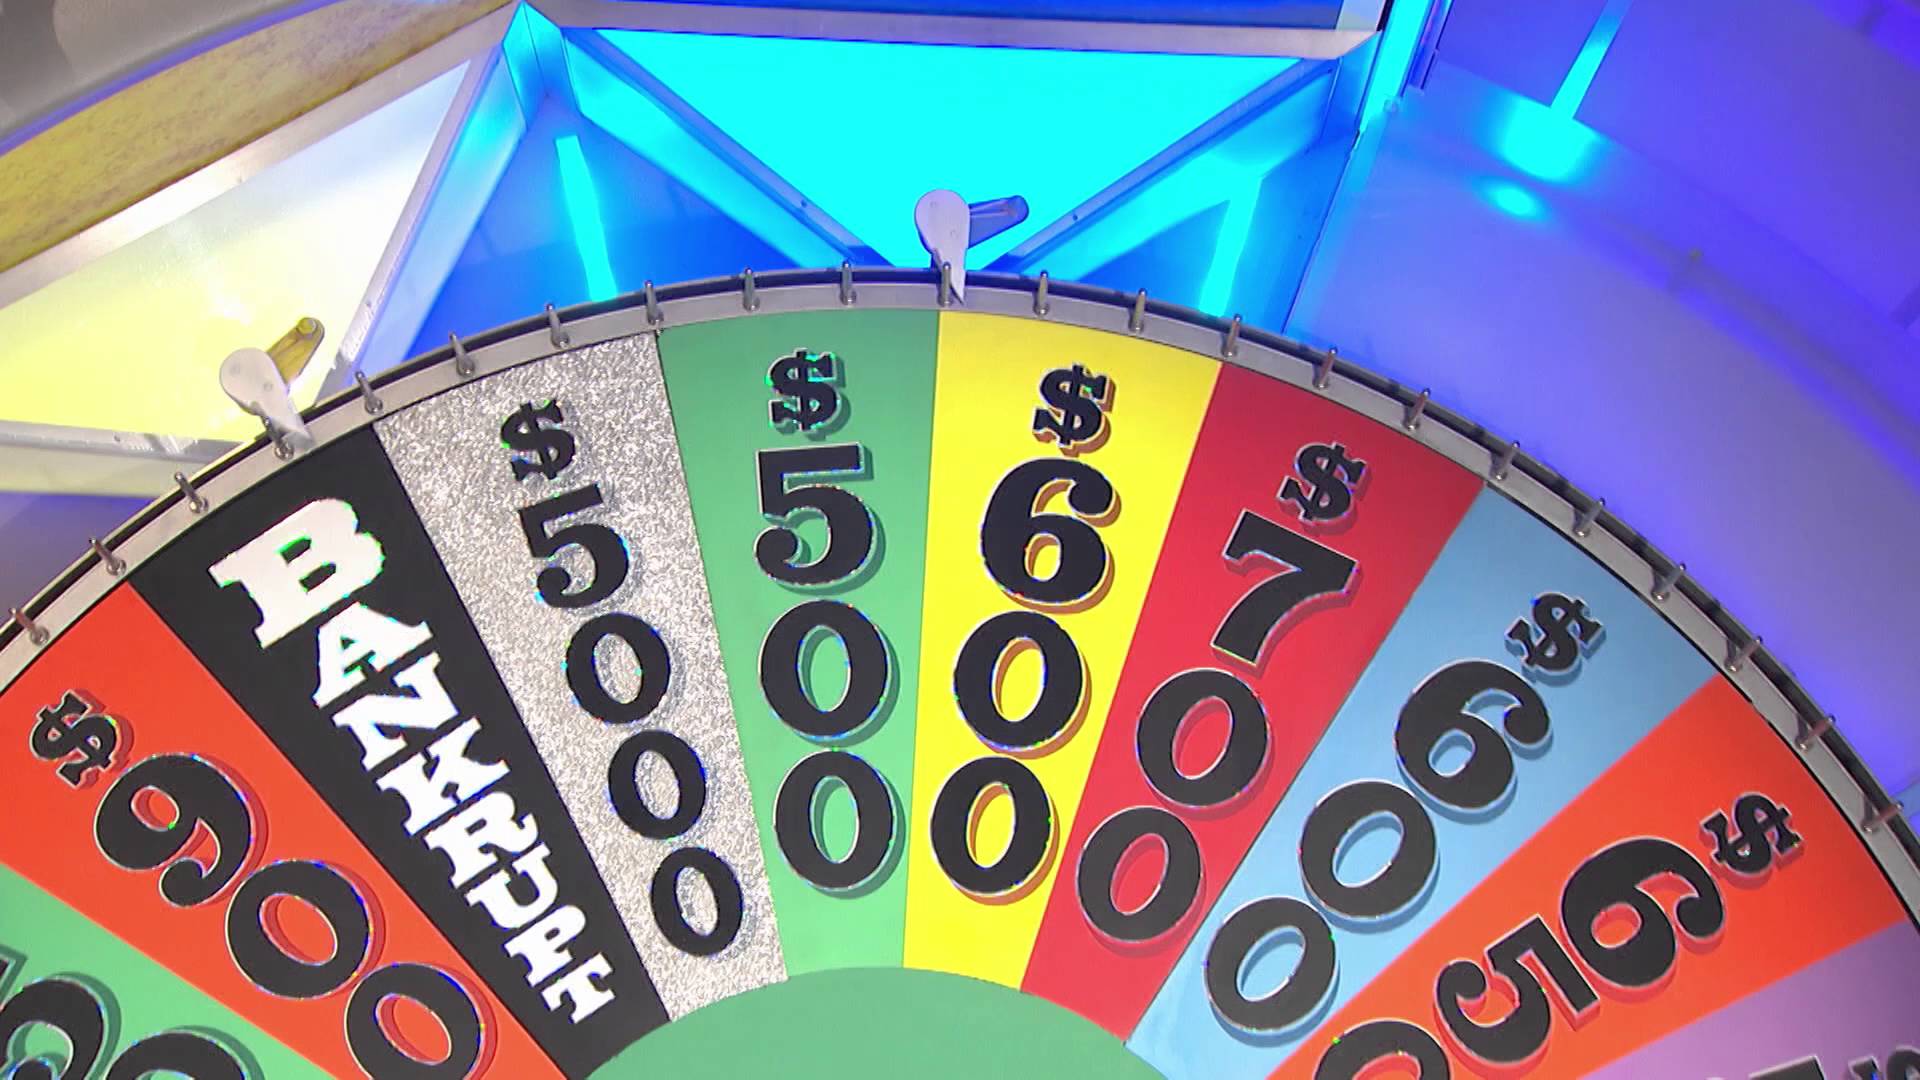 Wheel of Fortune Player Has an Incredible Game, Solving Puzzles With as